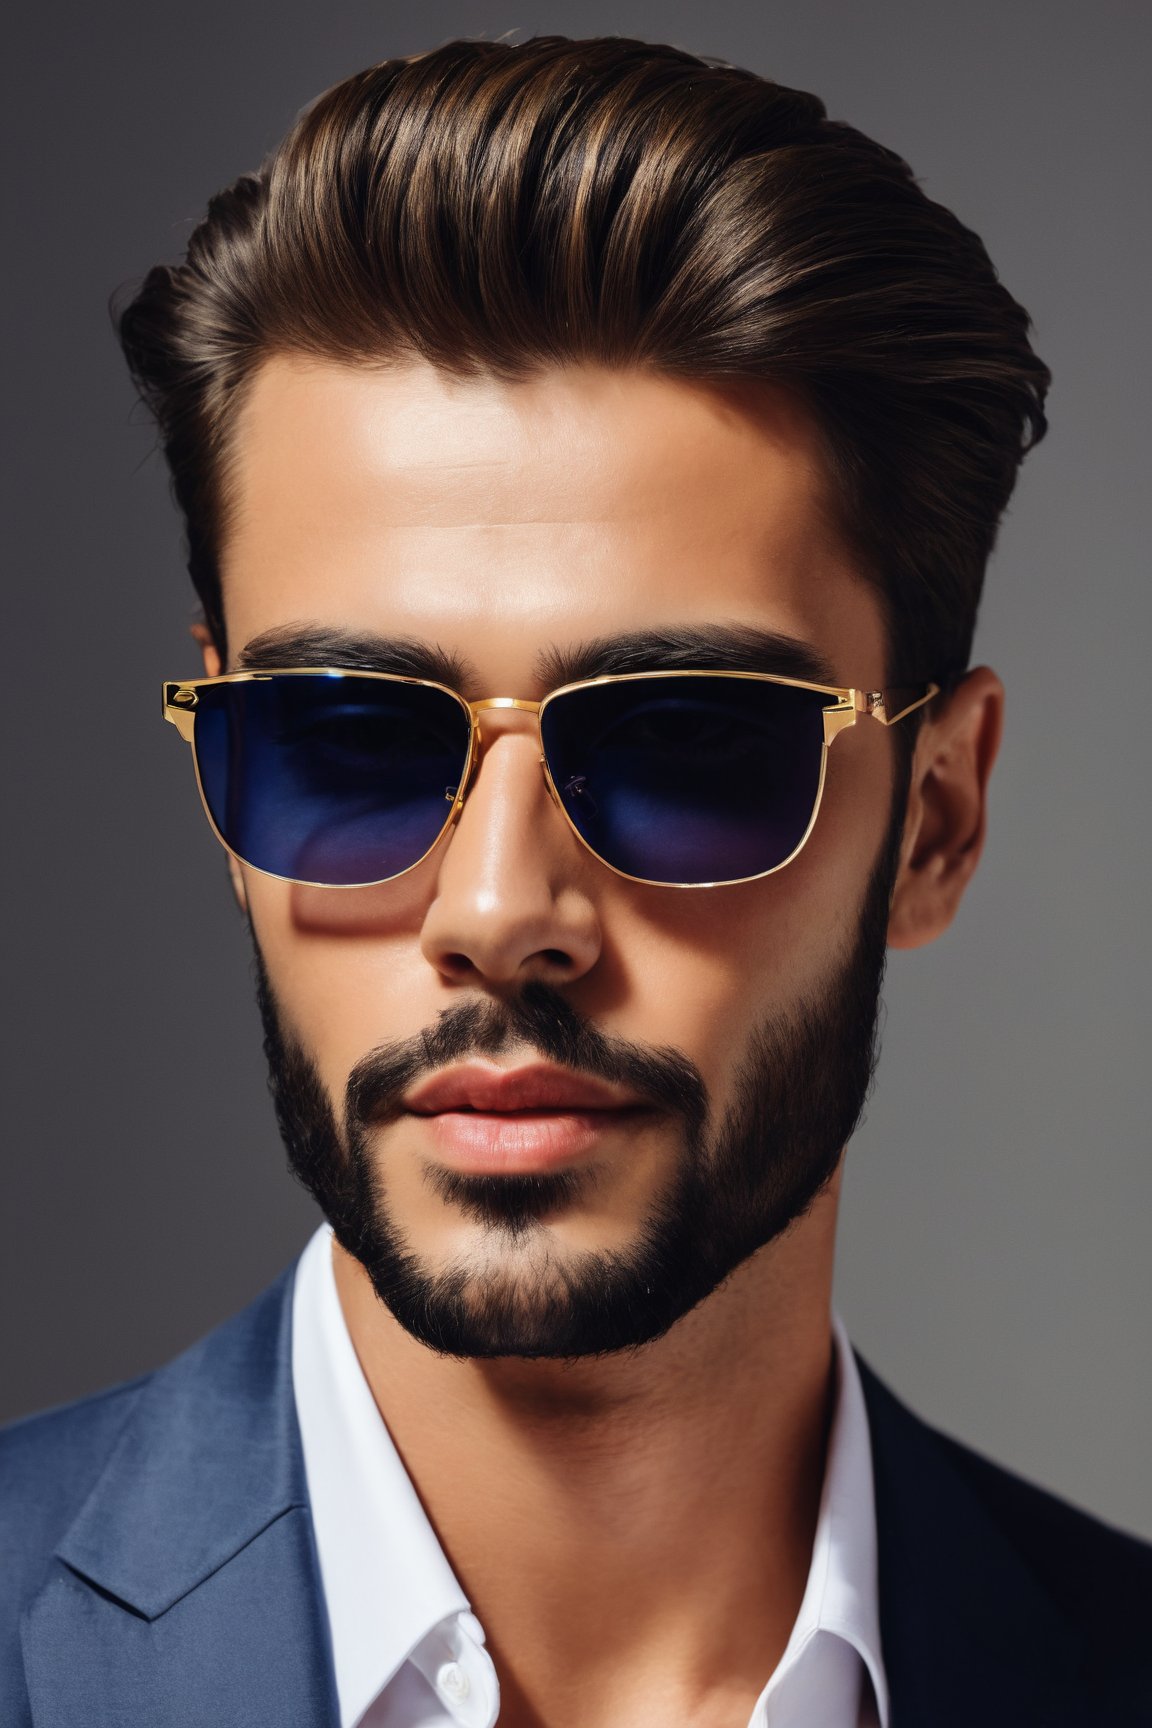 (realistic:1.2),visually stunning portrait,man with a stylish and confident expression,wearing trendy sunglasses,detailed facial features,meticulously styled hair,impeccable grooming,striking composition,captivating lighting,subtle shadows and highlights,vivid colors.